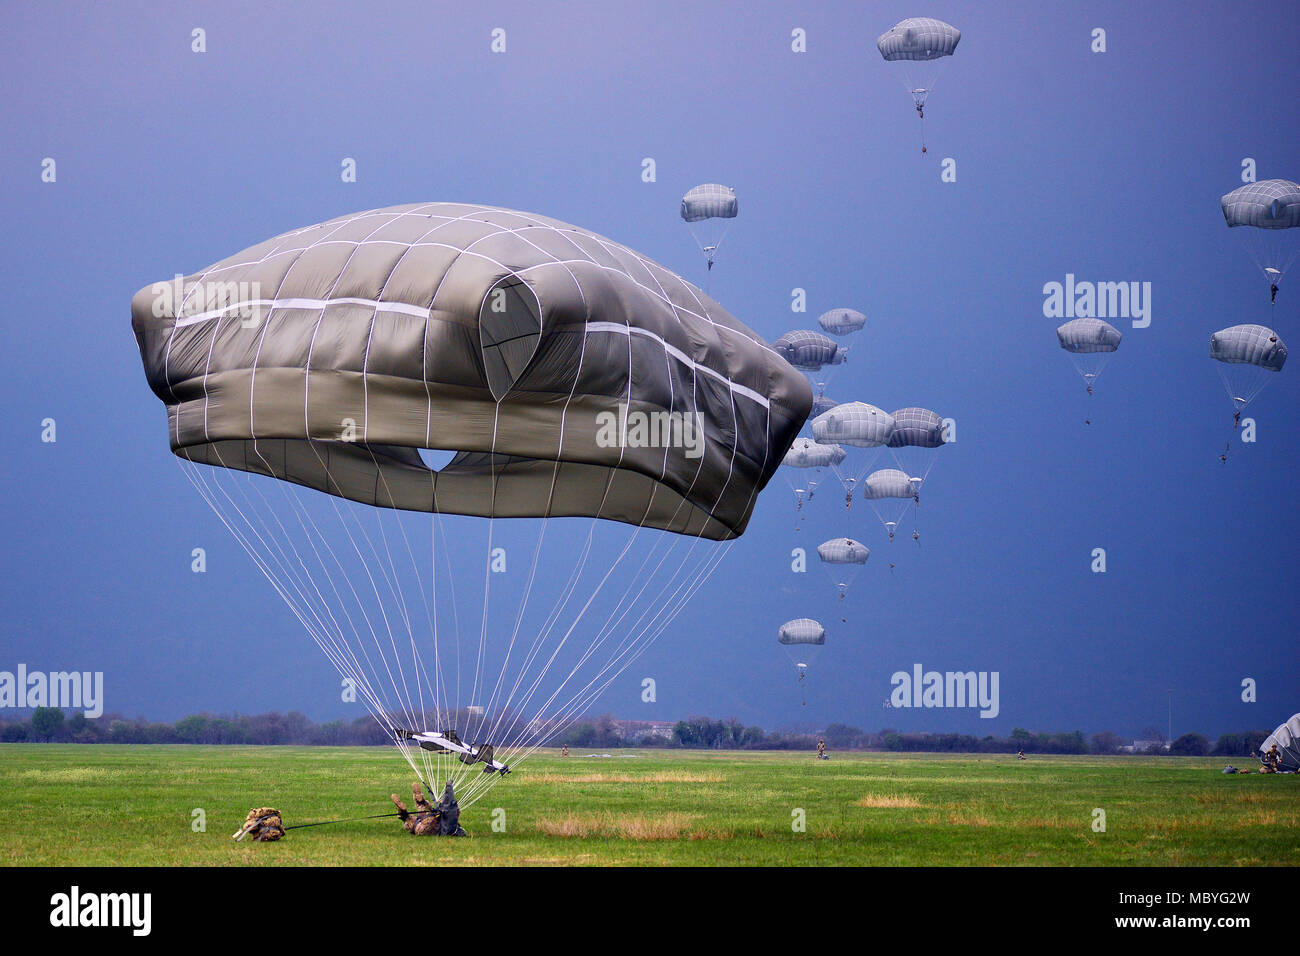 A U.S. Army Paratrooper assigned to the 173rd Airborne Brigade, Italian Army Paratroopers assigned to Folgore Brigade and Poland Paratroopers prepares to land after exiting a U.S. Air Force C-130 Hercules aircraft at Juliet Drope Zone in Pordenone, April 10, 2018. The 173rd Airborne Brigade is the U.S. Army Contingency Response Force in Europe, capable of projecting ready forces anywhere in the U.S. European, Africa or Central Commands' areas of responsibility. (U.S. Army photo by Paolo Bovo) Stock Photo